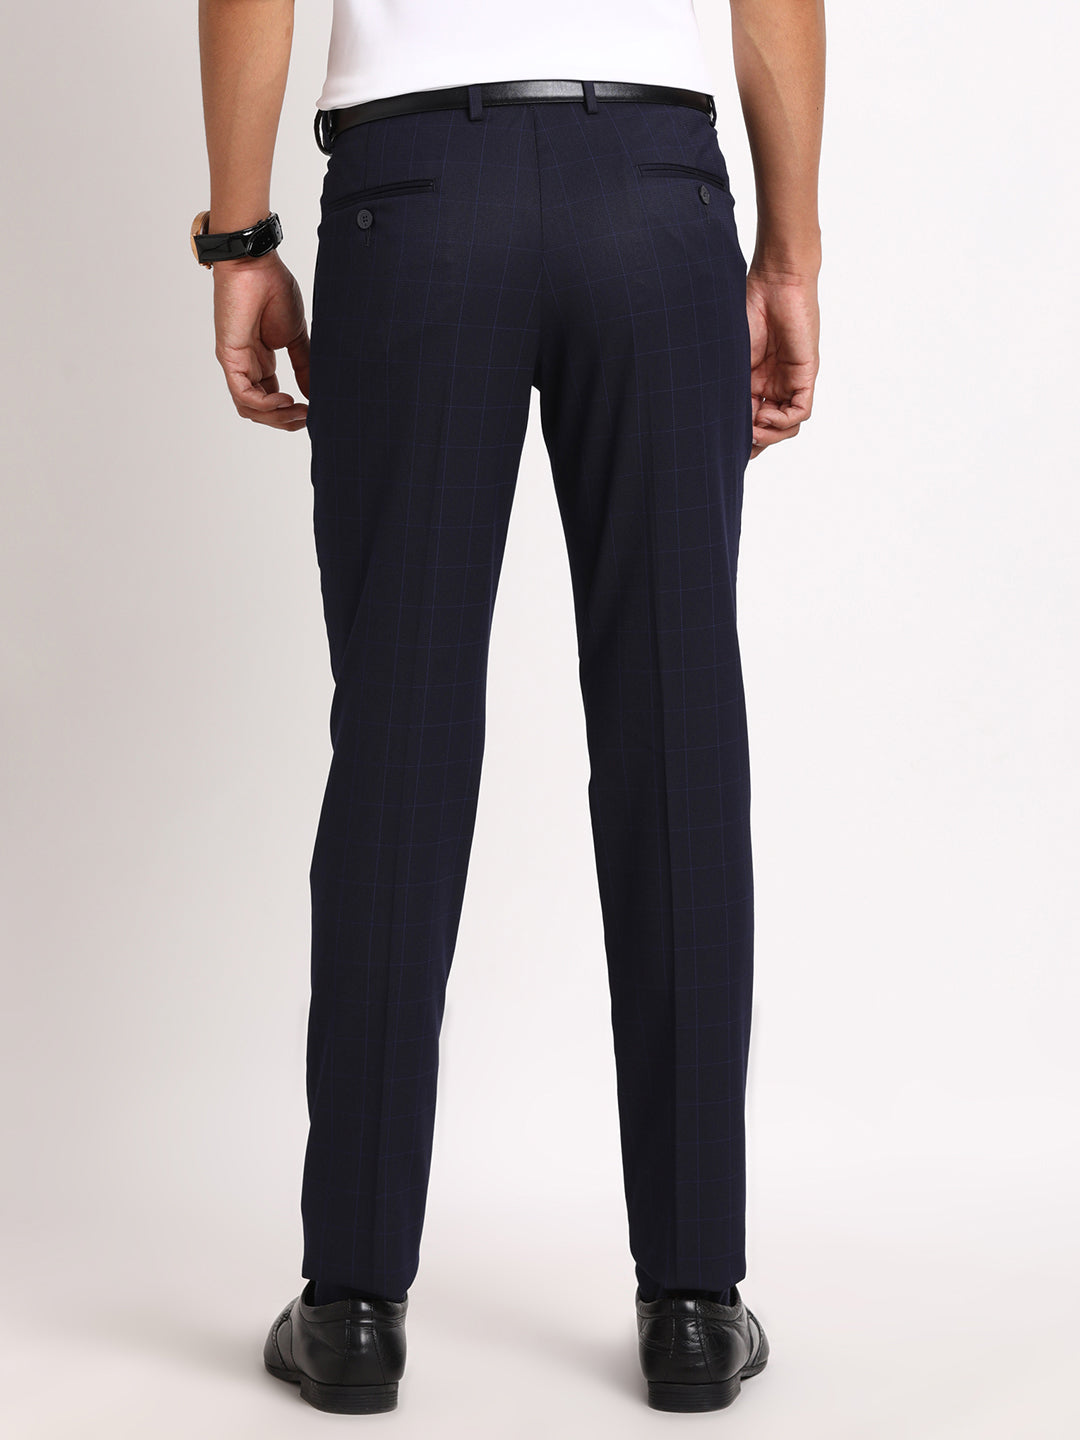 Poly Viscose Navy Blue Checkered Ultra Slim Fit Flat Front Formal Trouser